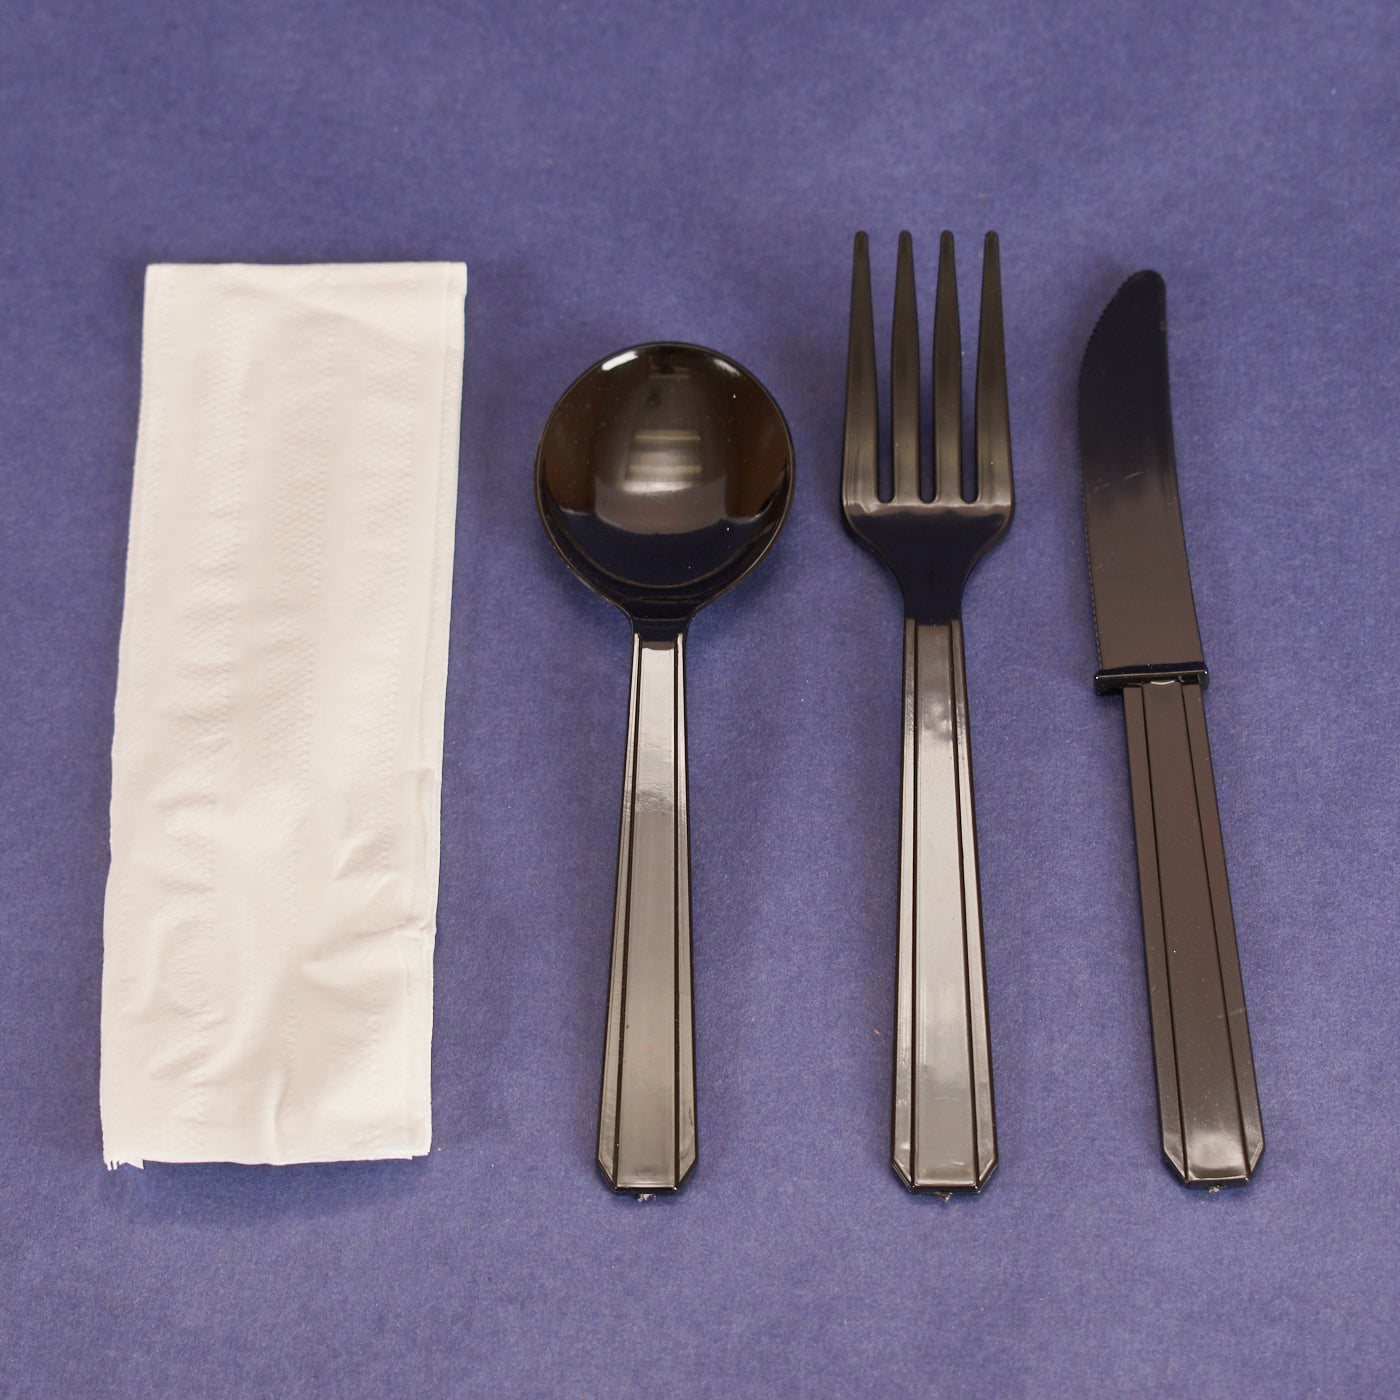 Cutlery Kits, Heavy-Weight Black Plastic Knife, Fork, Soup Spoon, and 1Ply Napkin (250/set)